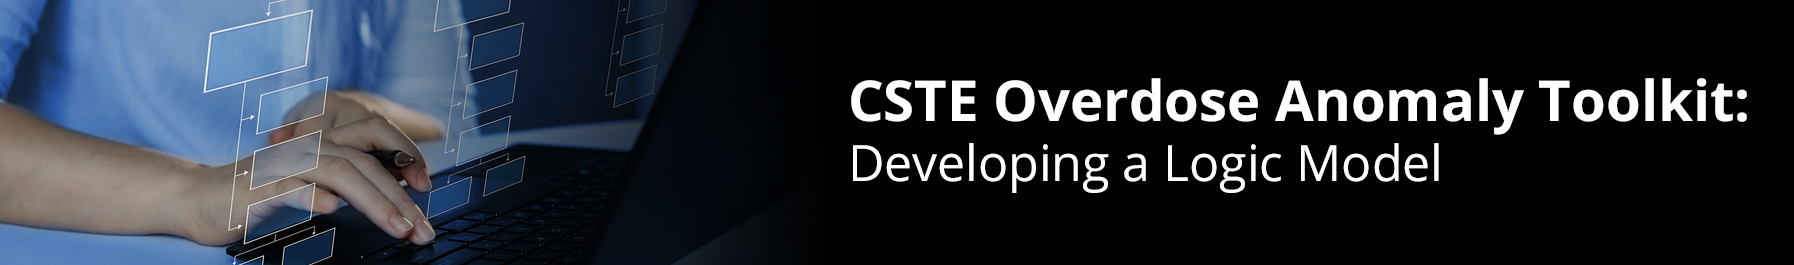 CSTE Overdose Anomaly Toolkit: Developing a Logic Model